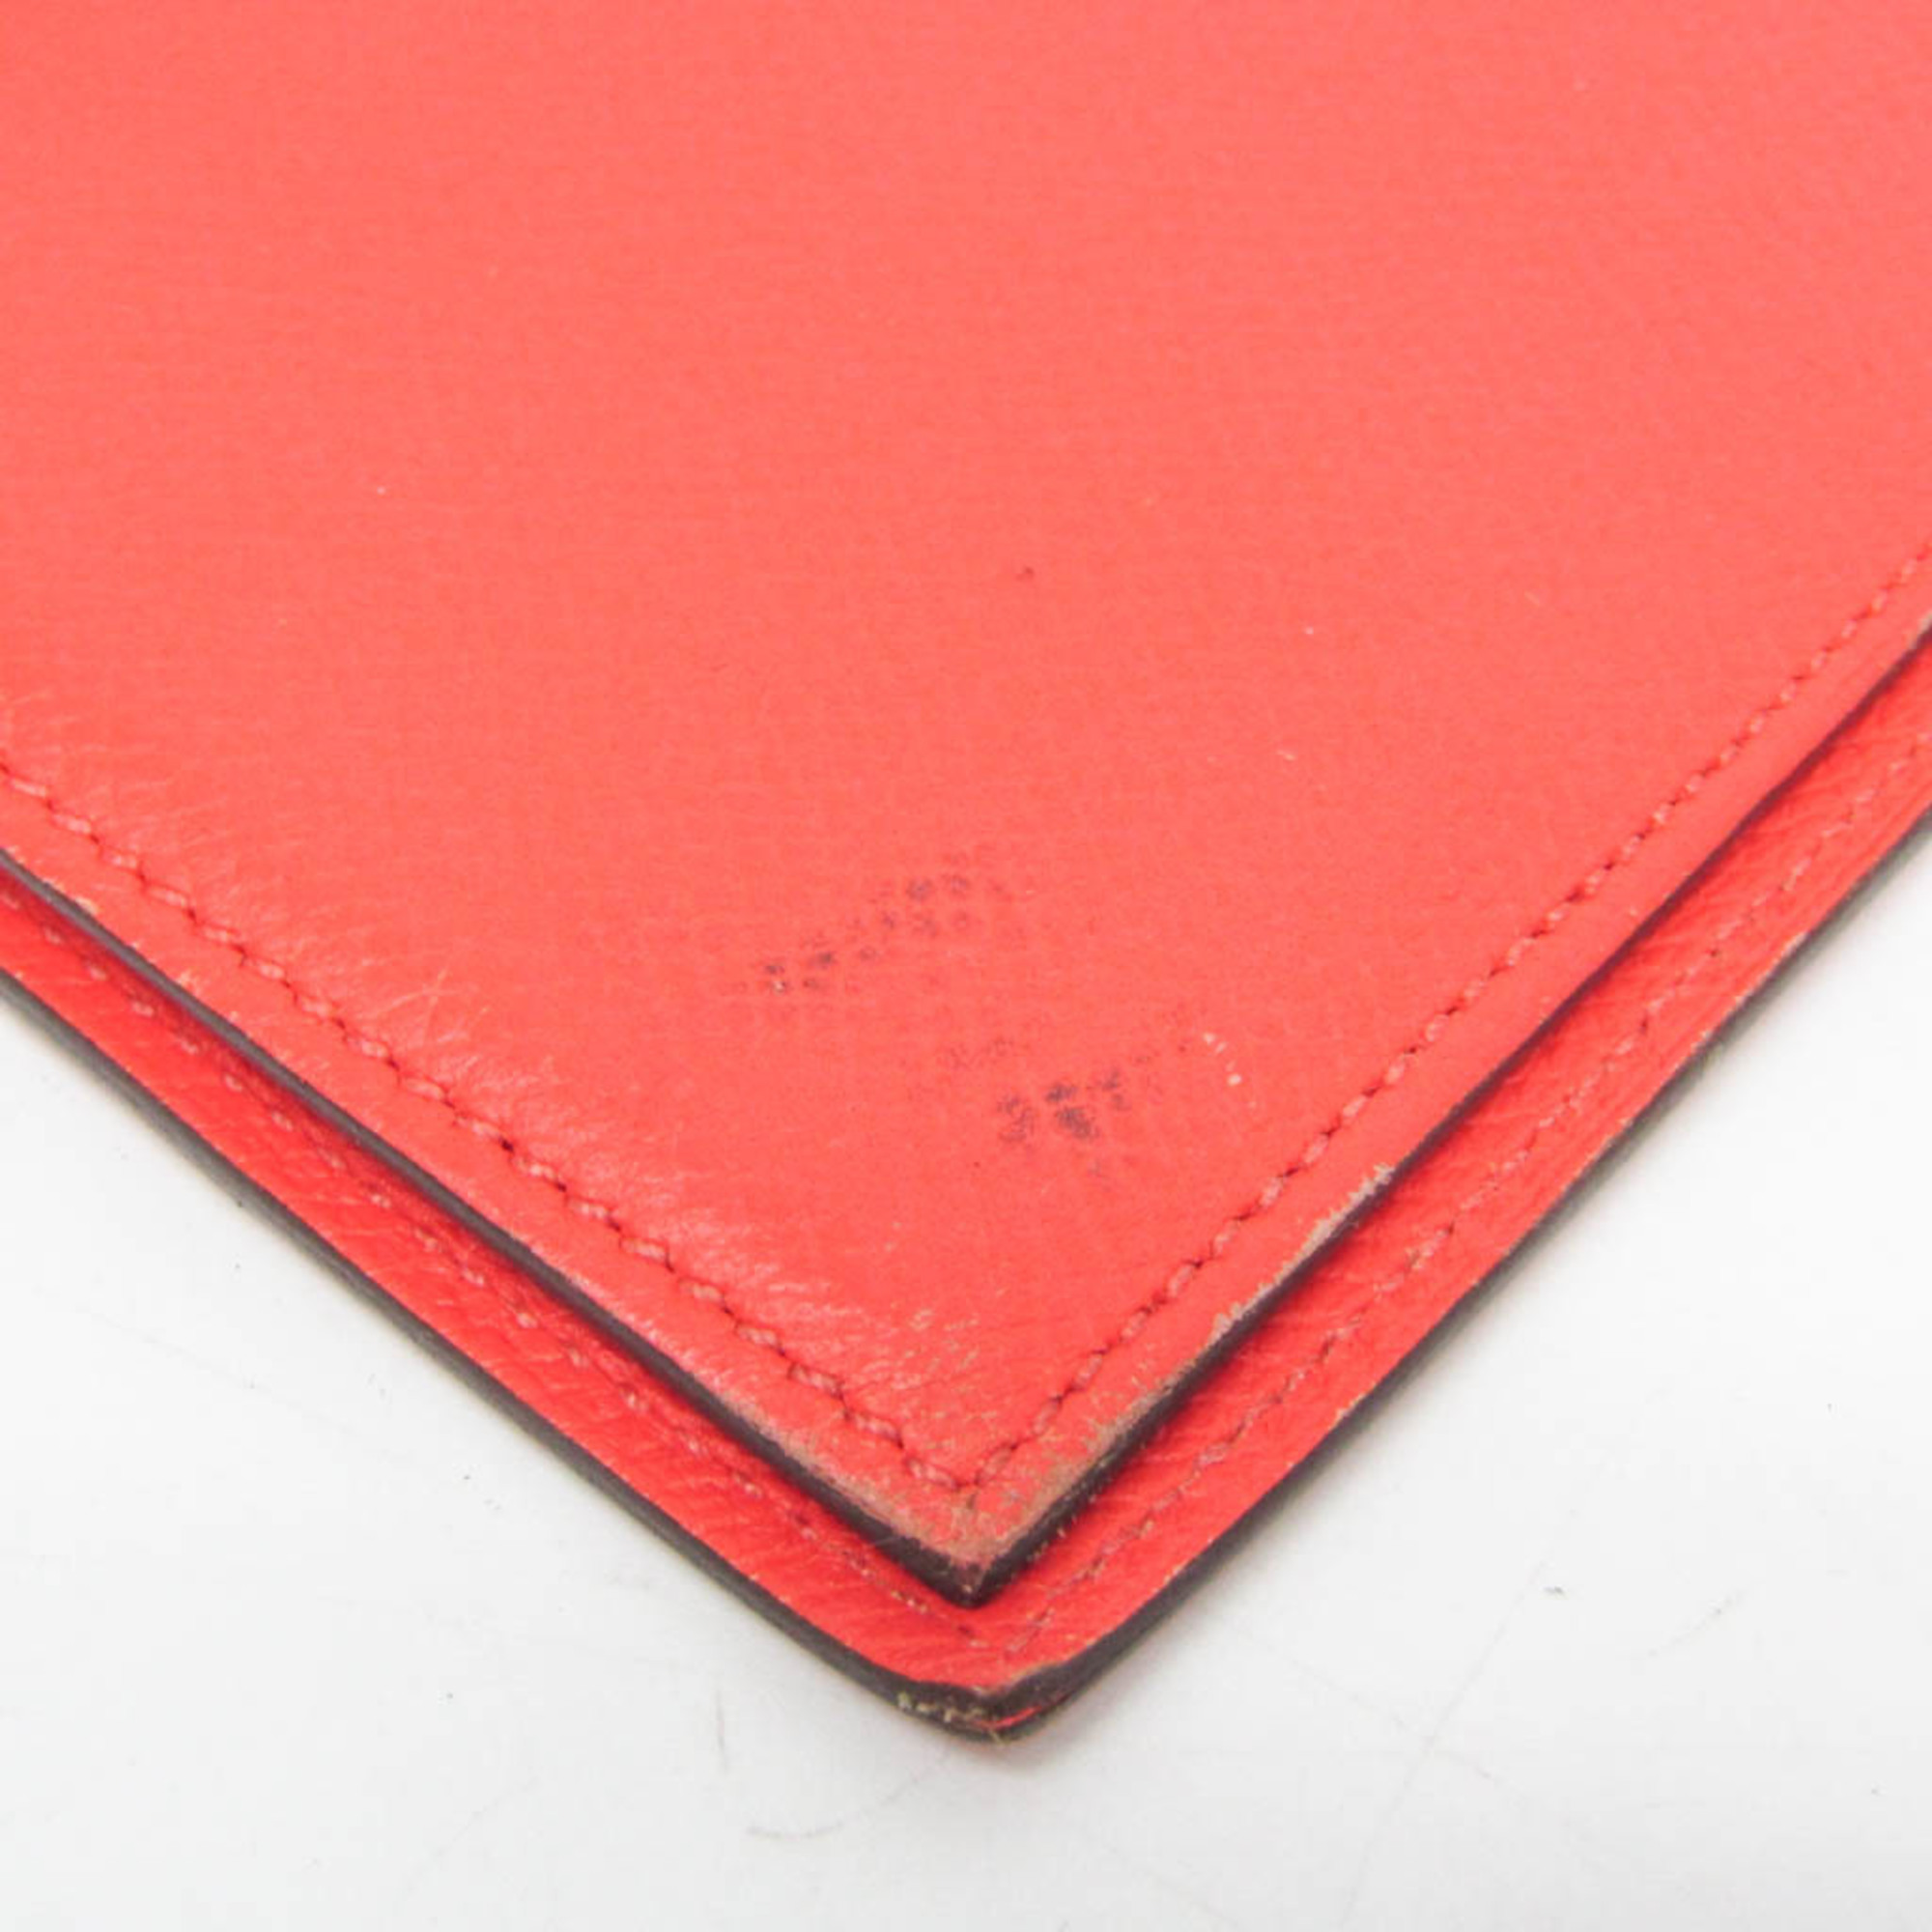 Hermes Agenda Compact Size Planner Cover Red Color Vision 2